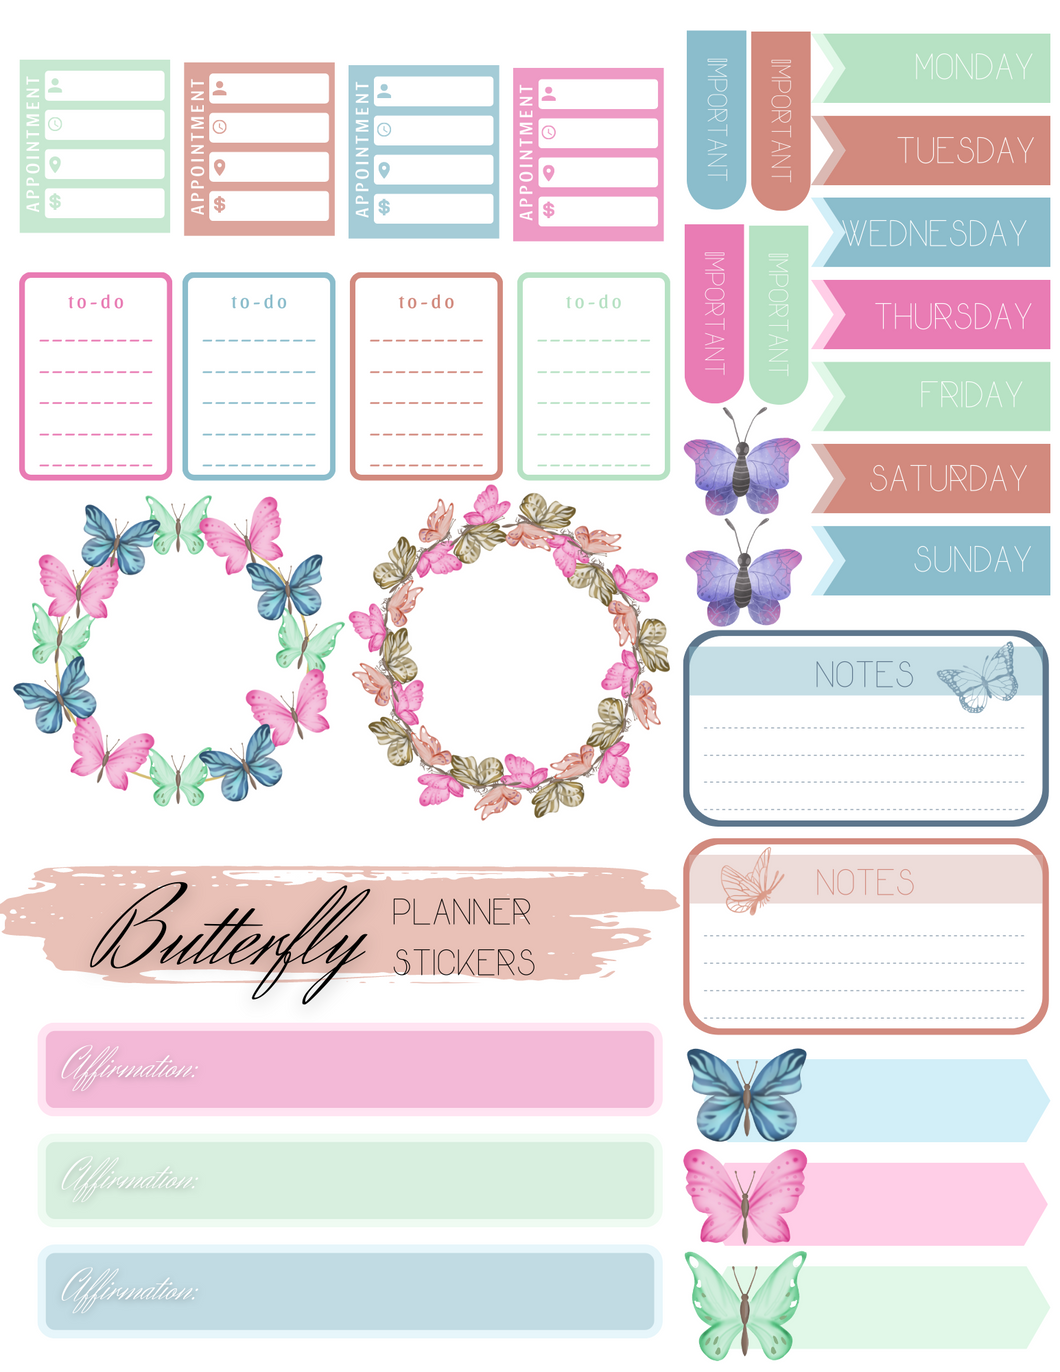 Butterfly Planner Stickers